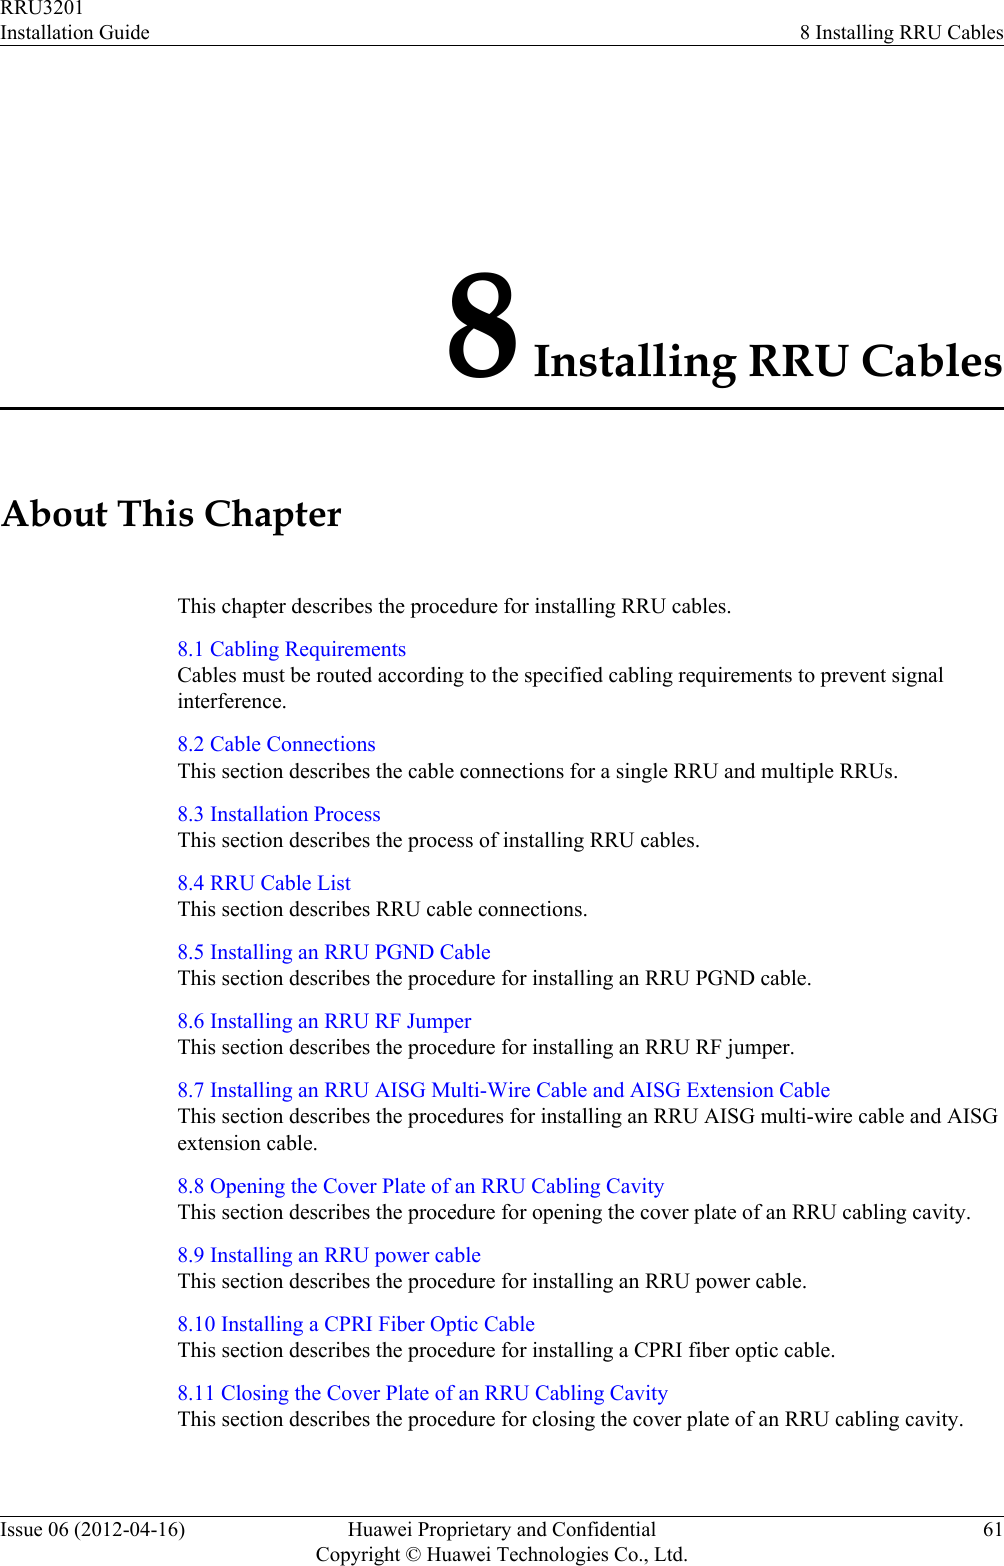 8 Installing RRU CablesAbout This ChapterThis chapter describes the procedure for installing RRU cables.8.1 Cabling RequirementsCables must be routed according to the specified cabling requirements to prevent signalinterference.8.2 Cable ConnectionsThis section describes the cable connections for a single RRU and multiple RRUs.8.3 Installation ProcessThis section describes the process of installing RRU cables.8.4 RRU Cable ListThis section describes RRU cable connections.8.5 Installing an RRU PGND CableThis section describes the procedure for installing an RRU PGND cable.8.6 Installing an RRU RF JumperThis section describes the procedure for installing an RRU RF jumper.8.7 Installing an RRU AISG Multi-Wire Cable and AISG Extension CableThis section describes the procedures for installing an RRU AISG multi-wire cable and AISGextension cable.8.8 Opening the Cover Plate of an RRU Cabling CavityThis section describes the procedure for opening the cover plate of an RRU cabling cavity.8.9 Installing an RRU power cableThis section describes the procedure for installing an RRU power cable.8.10 Installing a CPRI Fiber Optic CableThis section describes the procedure for installing a CPRI fiber optic cable.8.11 Closing the Cover Plate of an RRU Cabling CavityThis section describes the procedure for closing the cover plate of an RRU cabling cavity.RRU3201Installation Guide 8 Installing RRU CablesIssue 06 (2012-04-16) Huawei Proprietary and ConfidentialCopyright © Huawei Technologies Co., Ltd.61